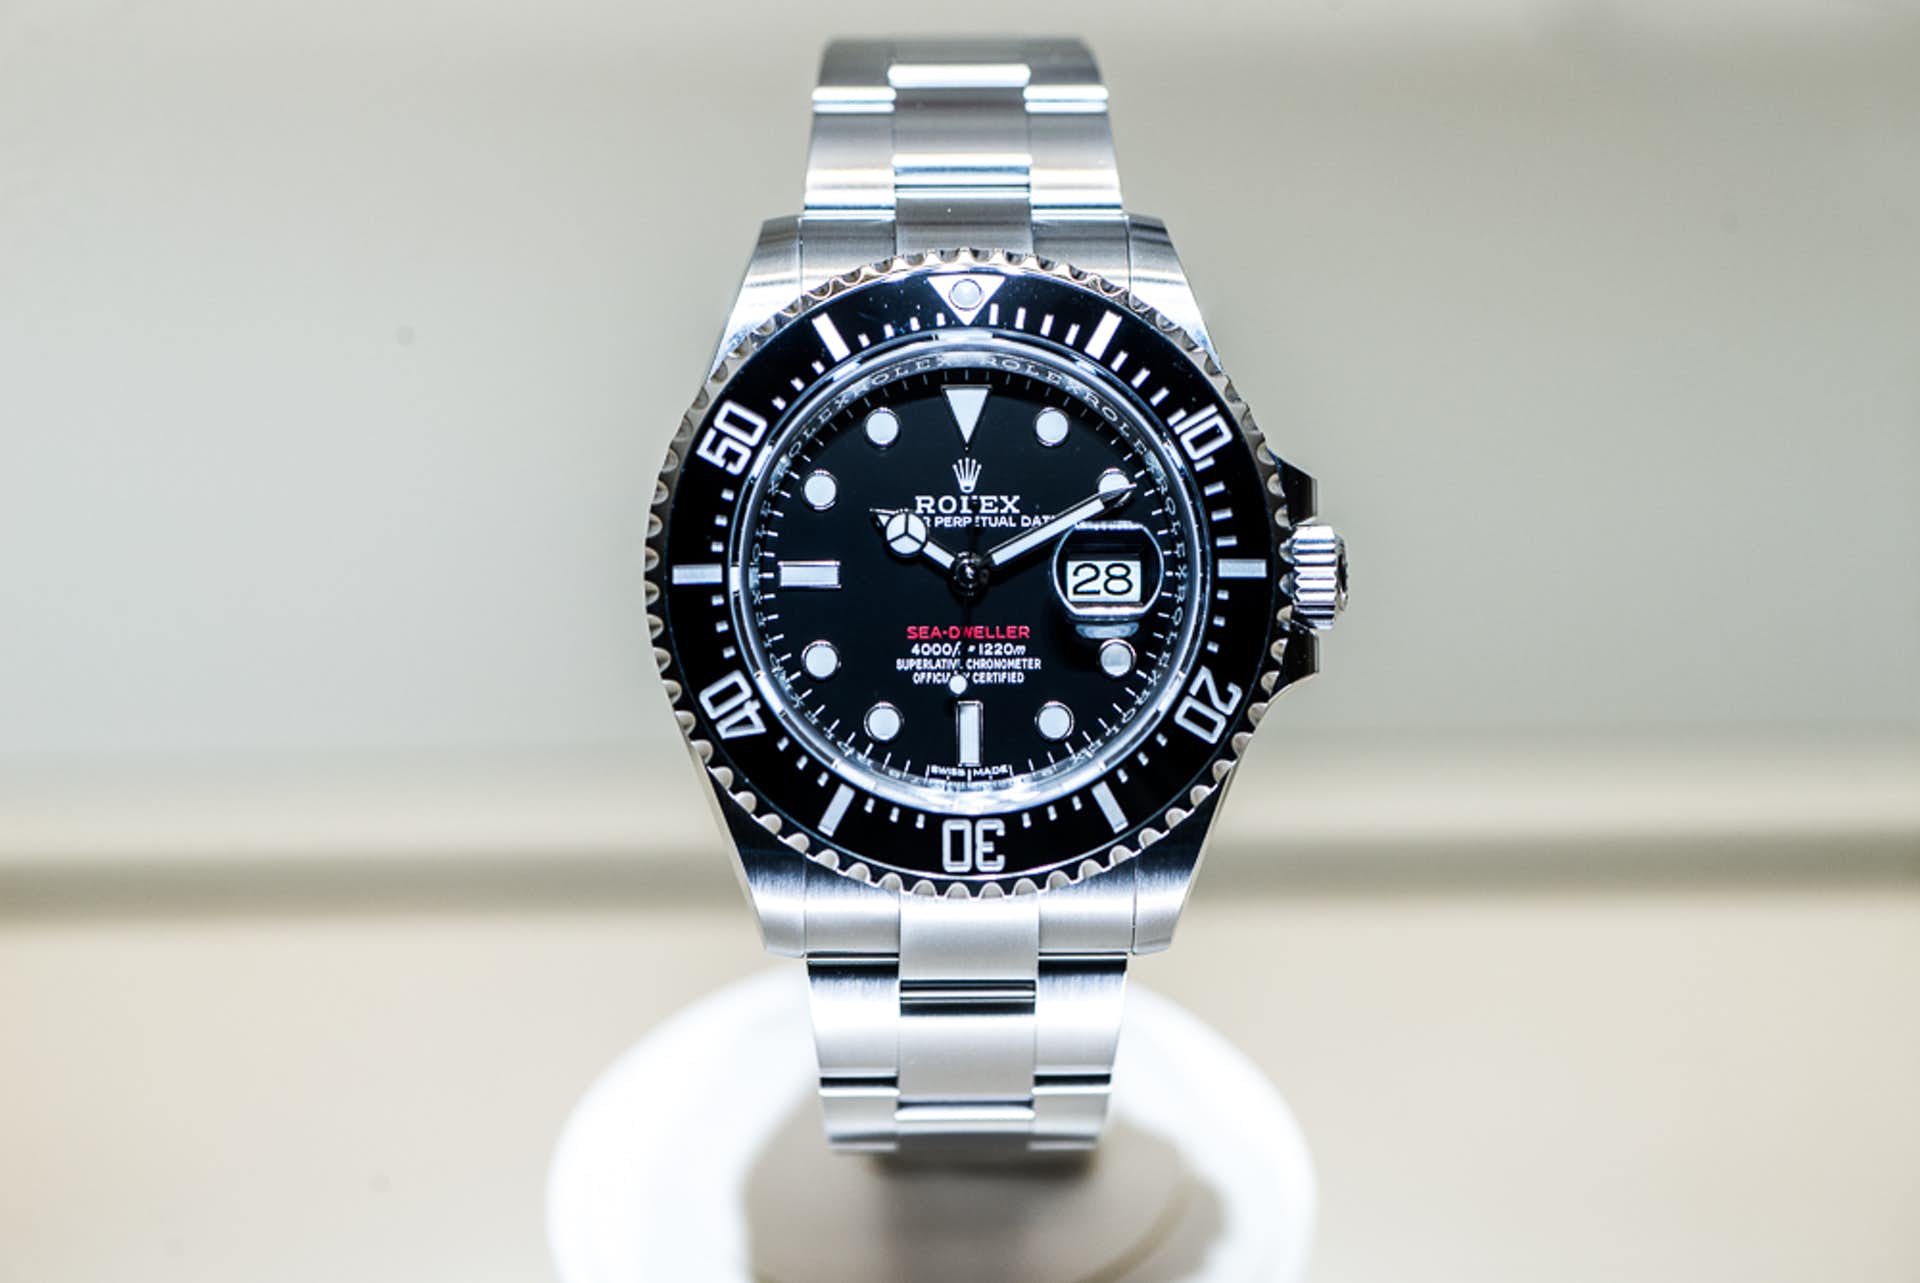 Baselworld 2017: Introducing the Rolex Sea-Dweller "Single Red"